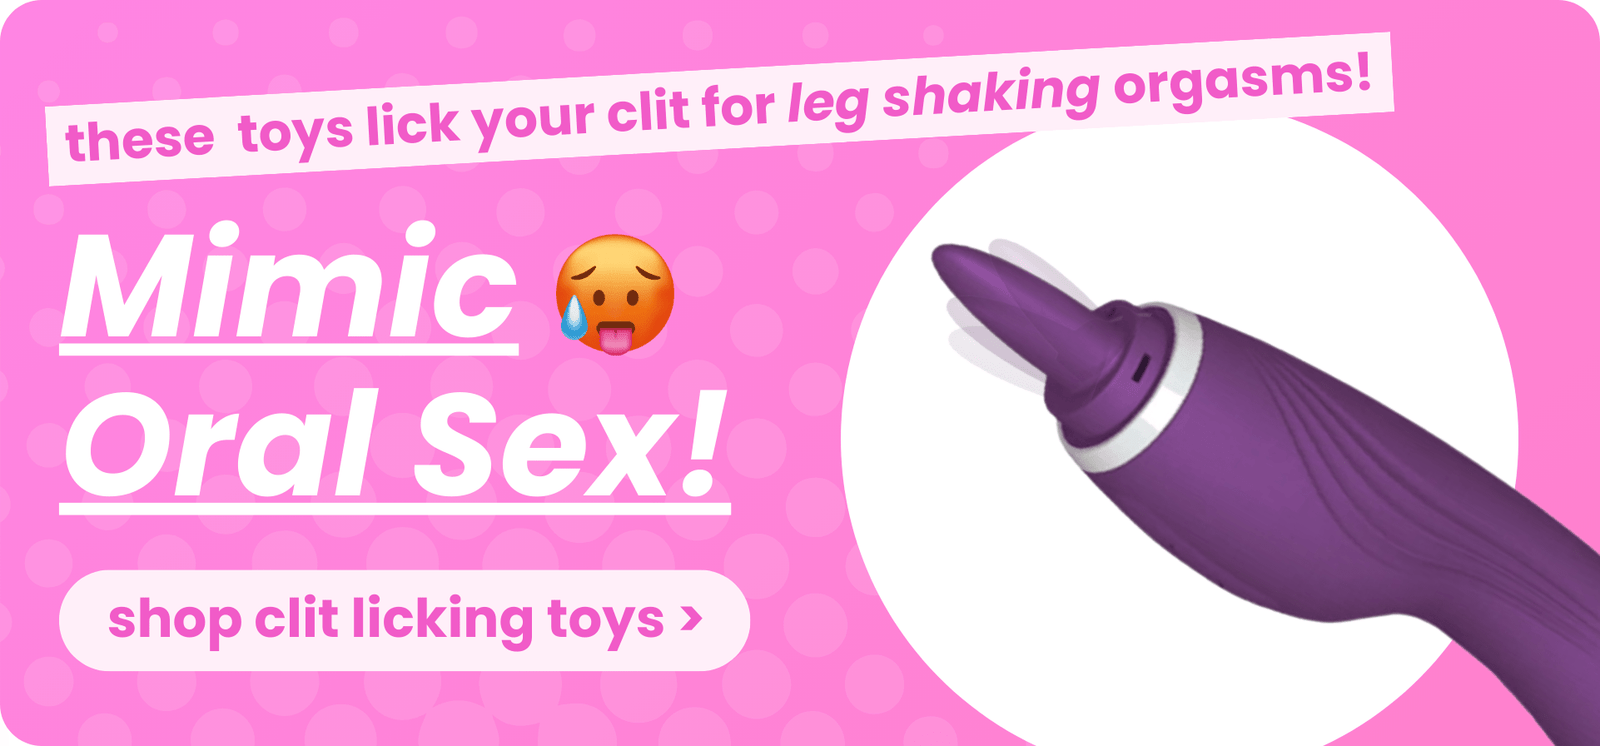 the best clit licking toys for leg shaking orgasms! These toys mimic oral sex. Shop the collection.